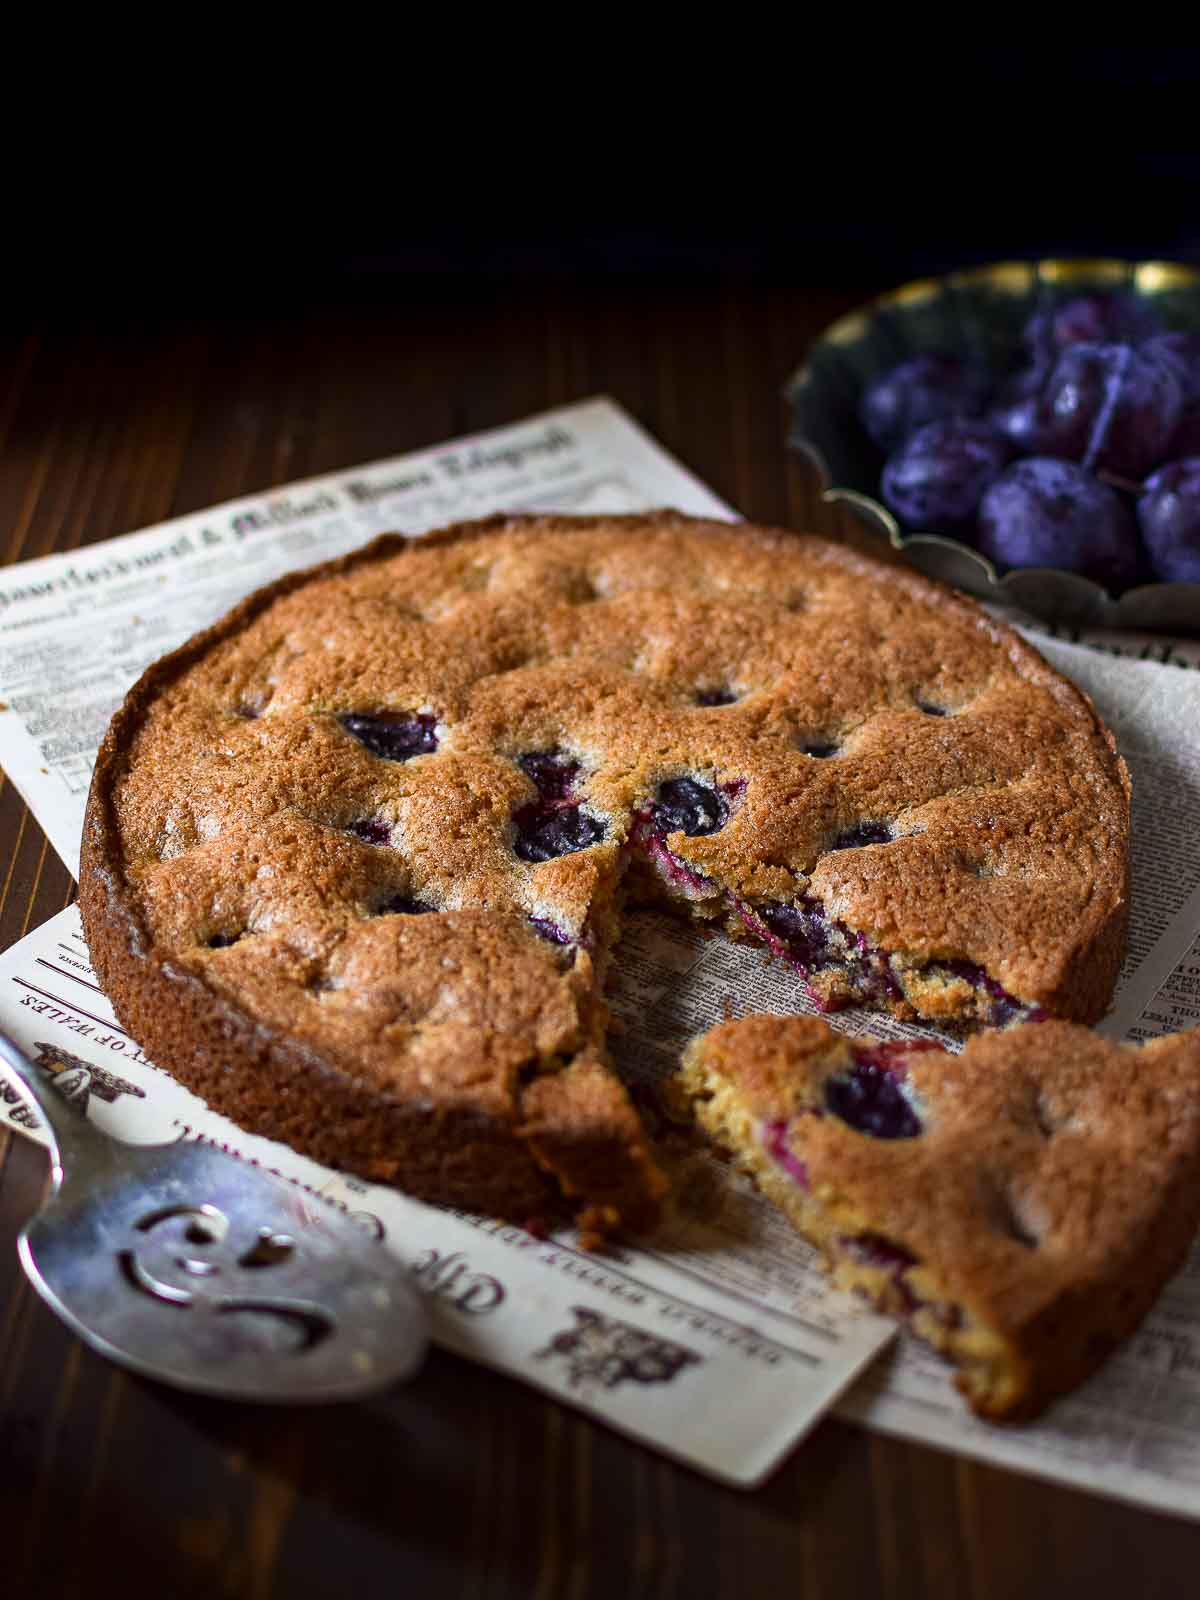 Angled view of plum cake with a slice removed on a wood surface.